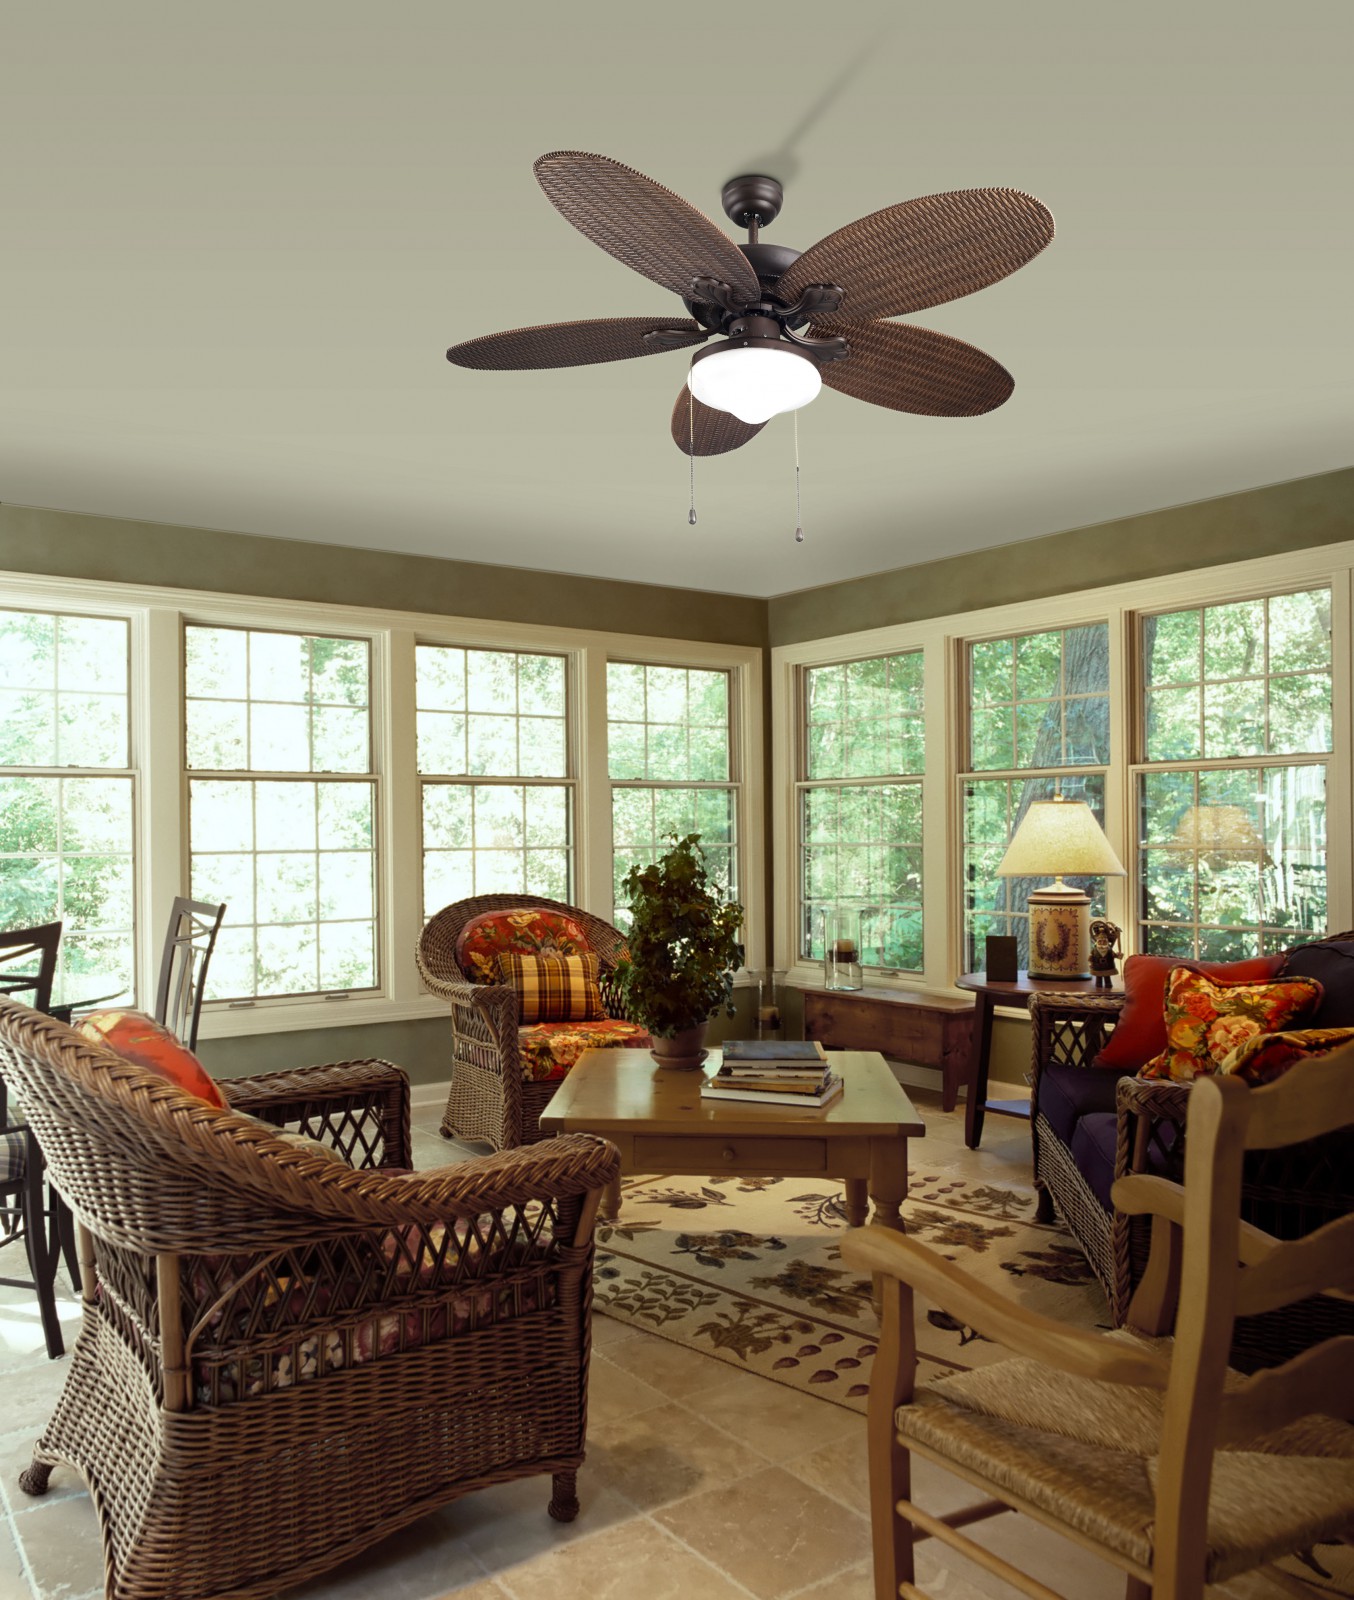 Ceiling Fan Phuket Brown 132cm 52 With Light Ceiling Fans For